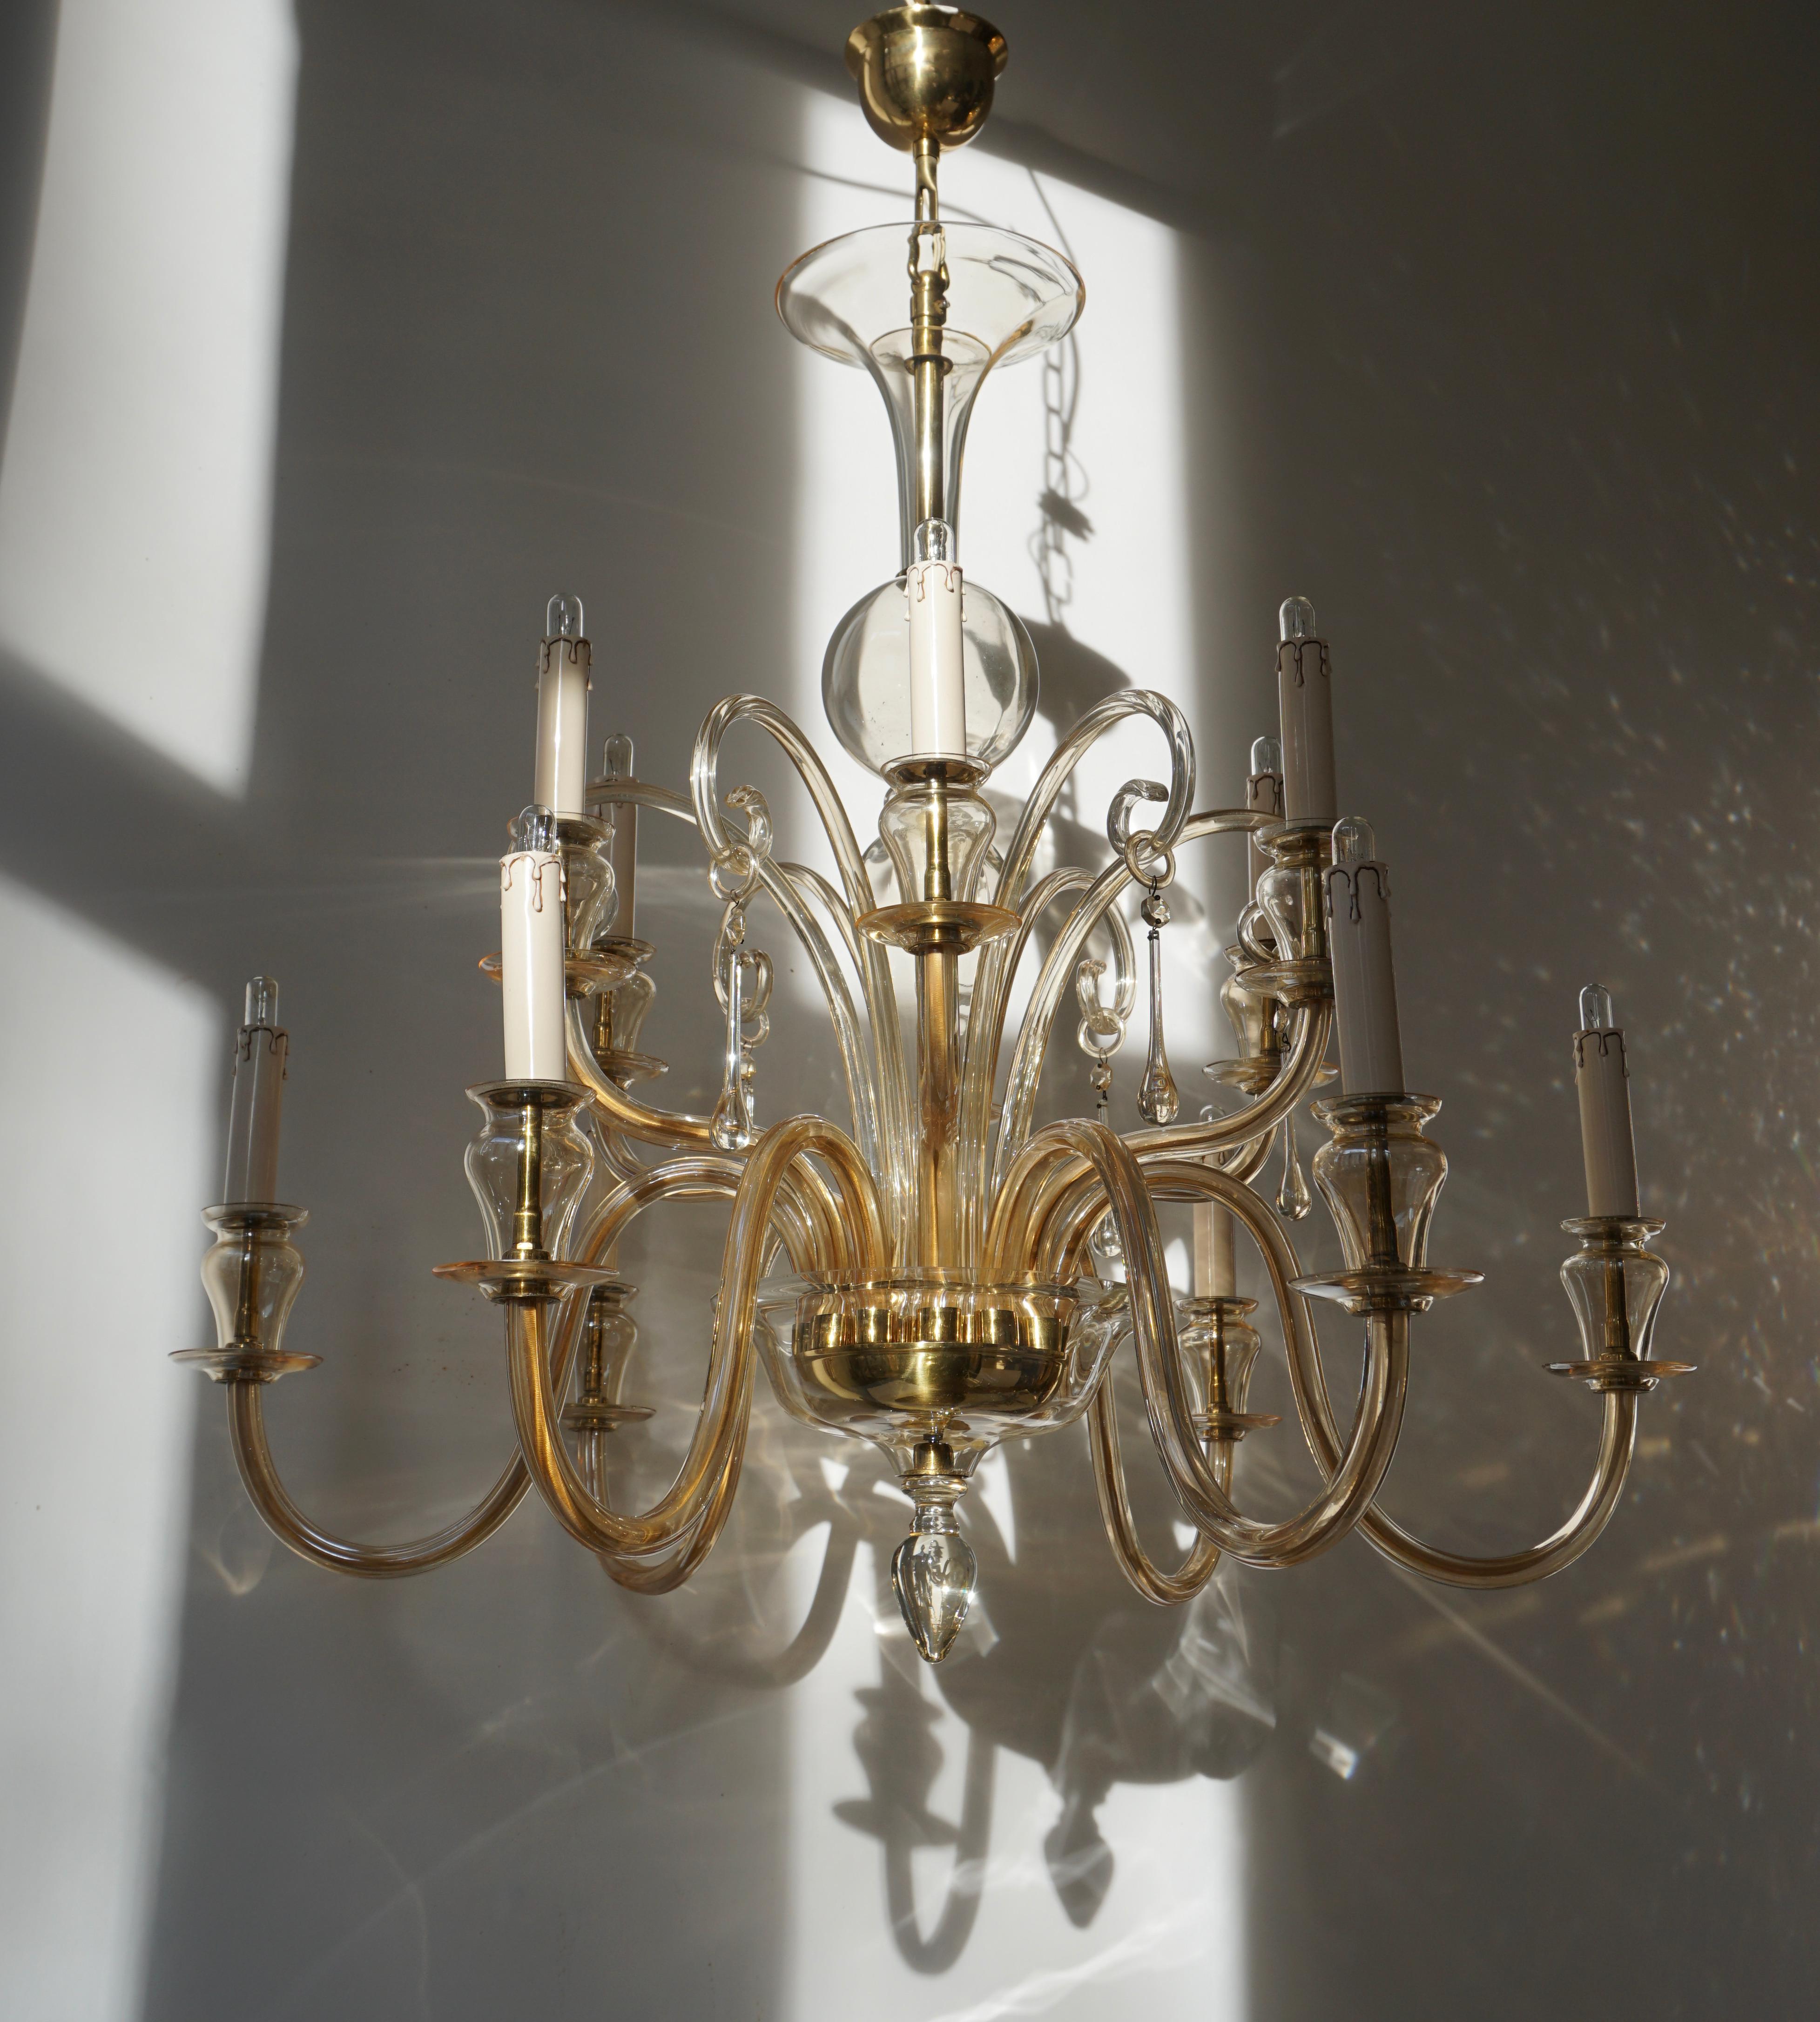 1970s Murano glass chandelier.

Contemporary Italian midcentury style, clear hand blown Venetian glass chandeliers or pendants in the modern neoclassical style with twelve arms attributed to Barovier with brass trim. Beautiful and fully working